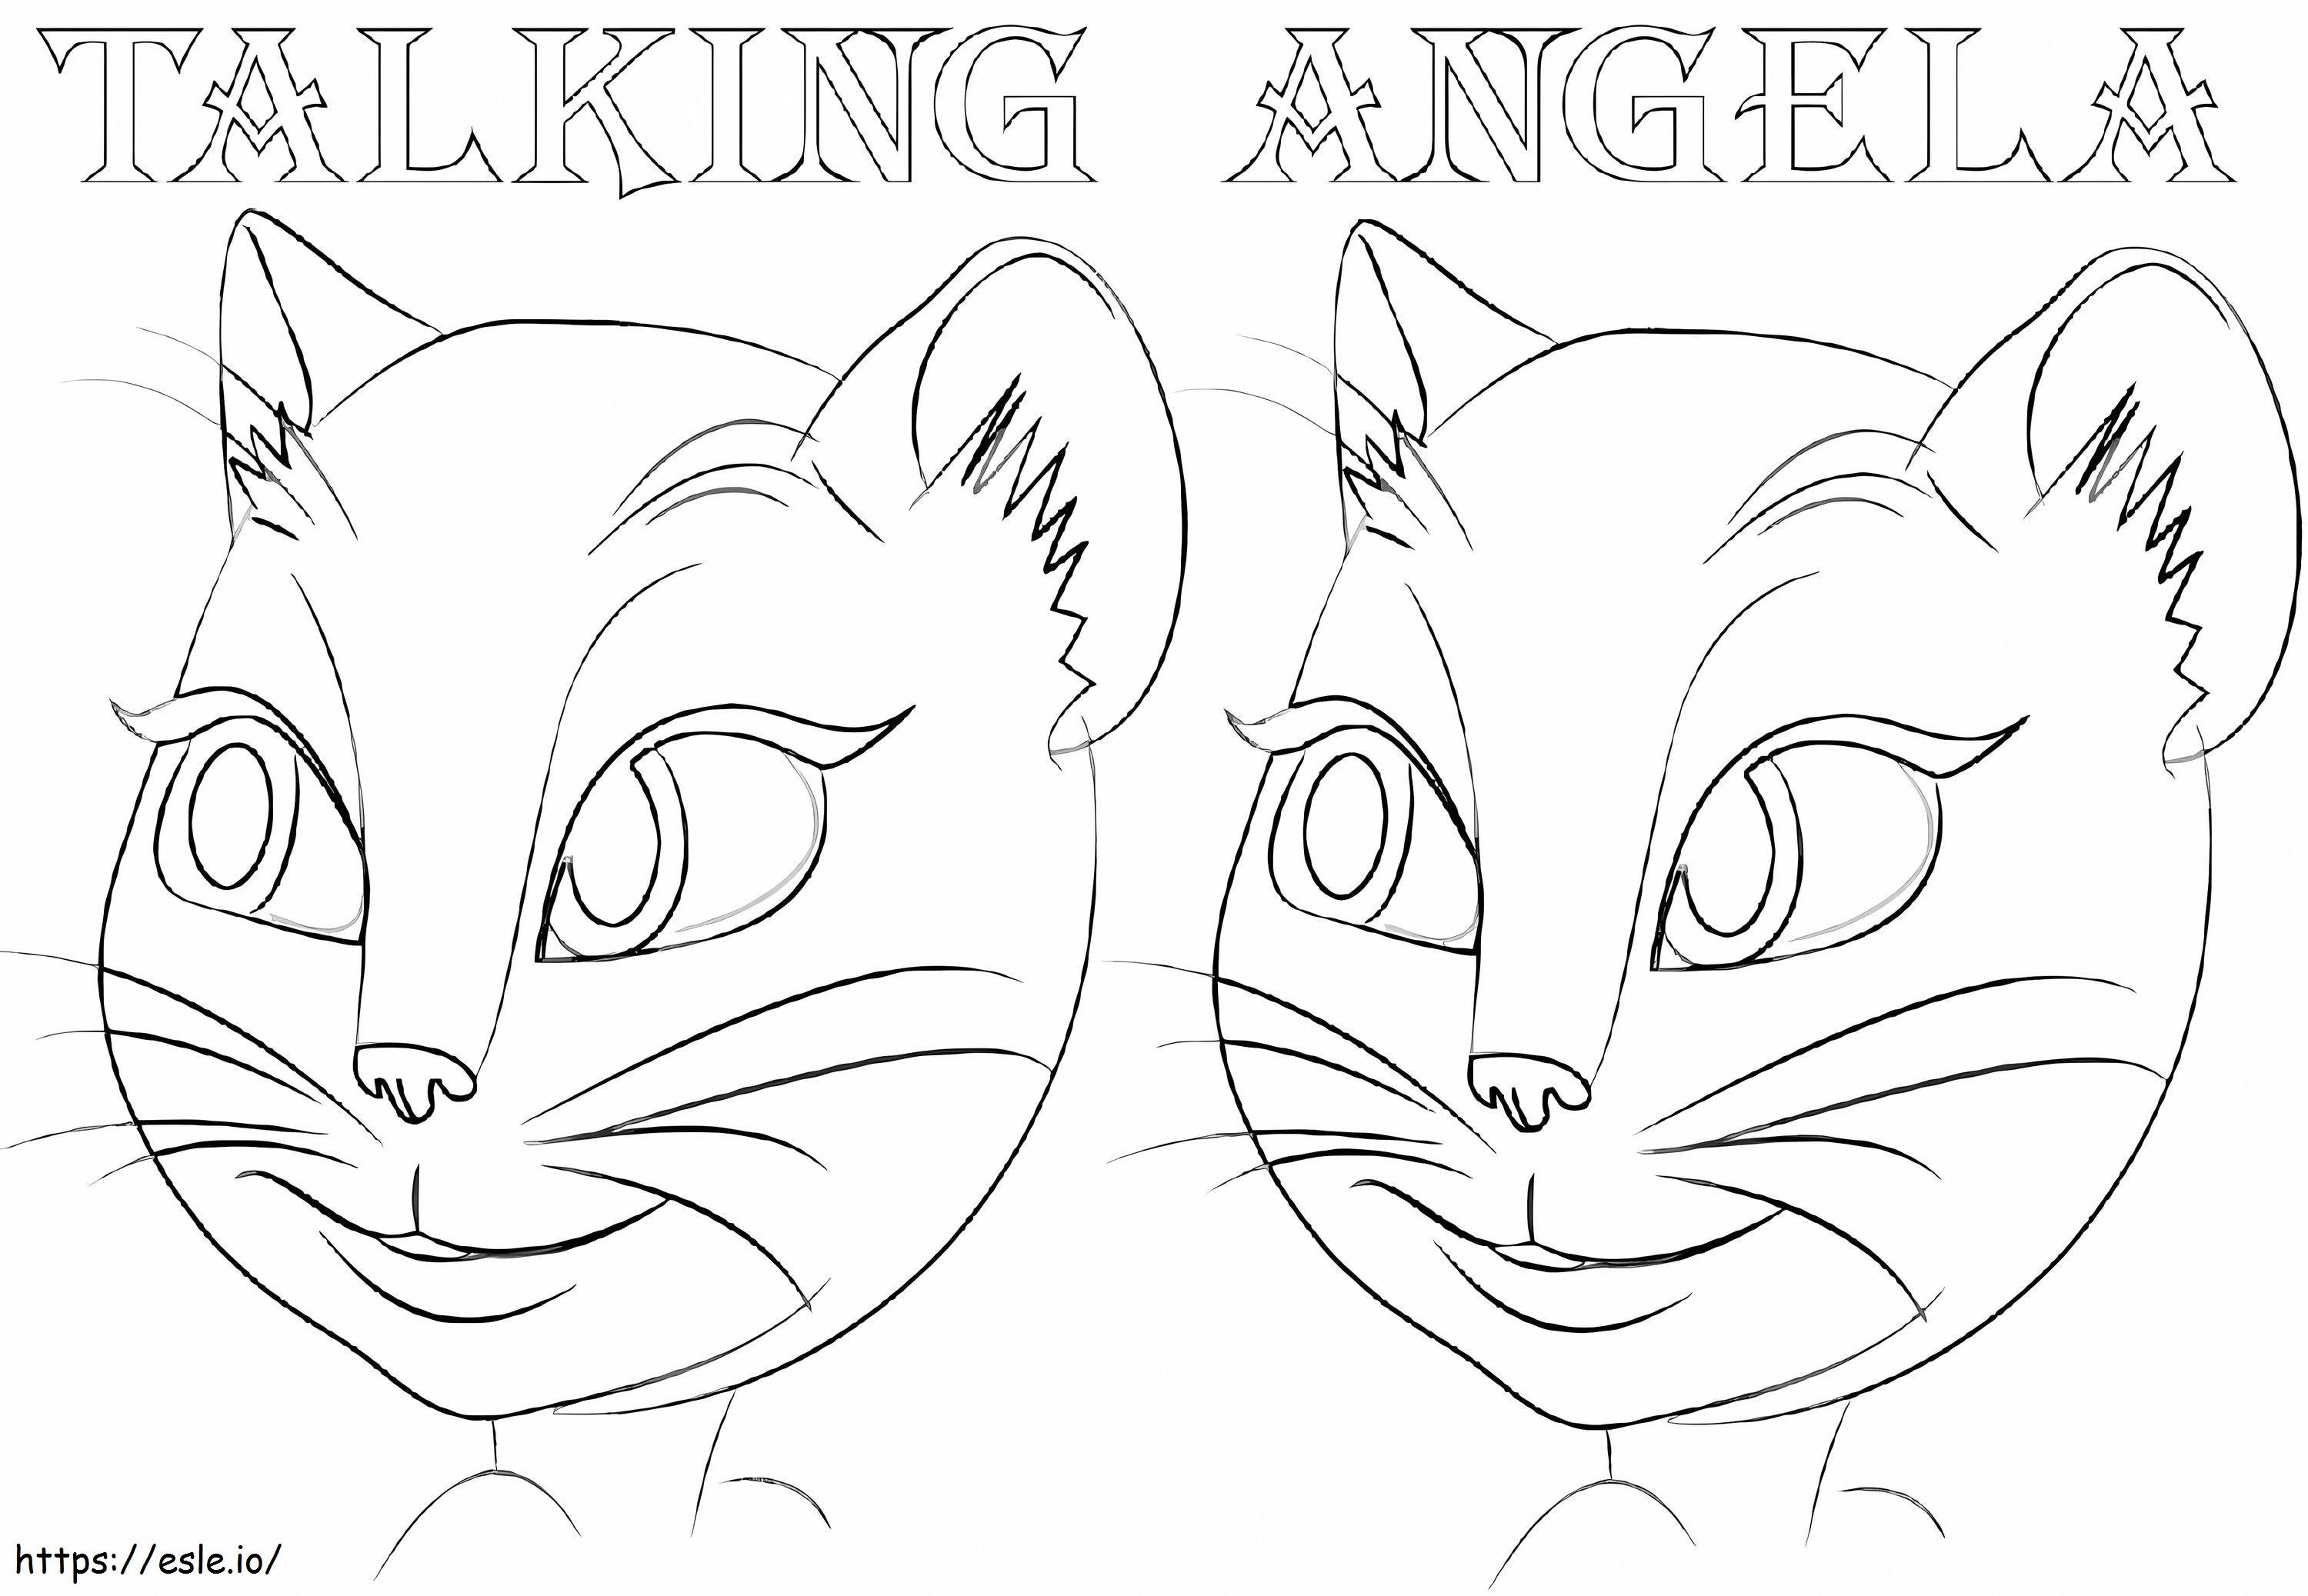 Old Talking Angela coloring page